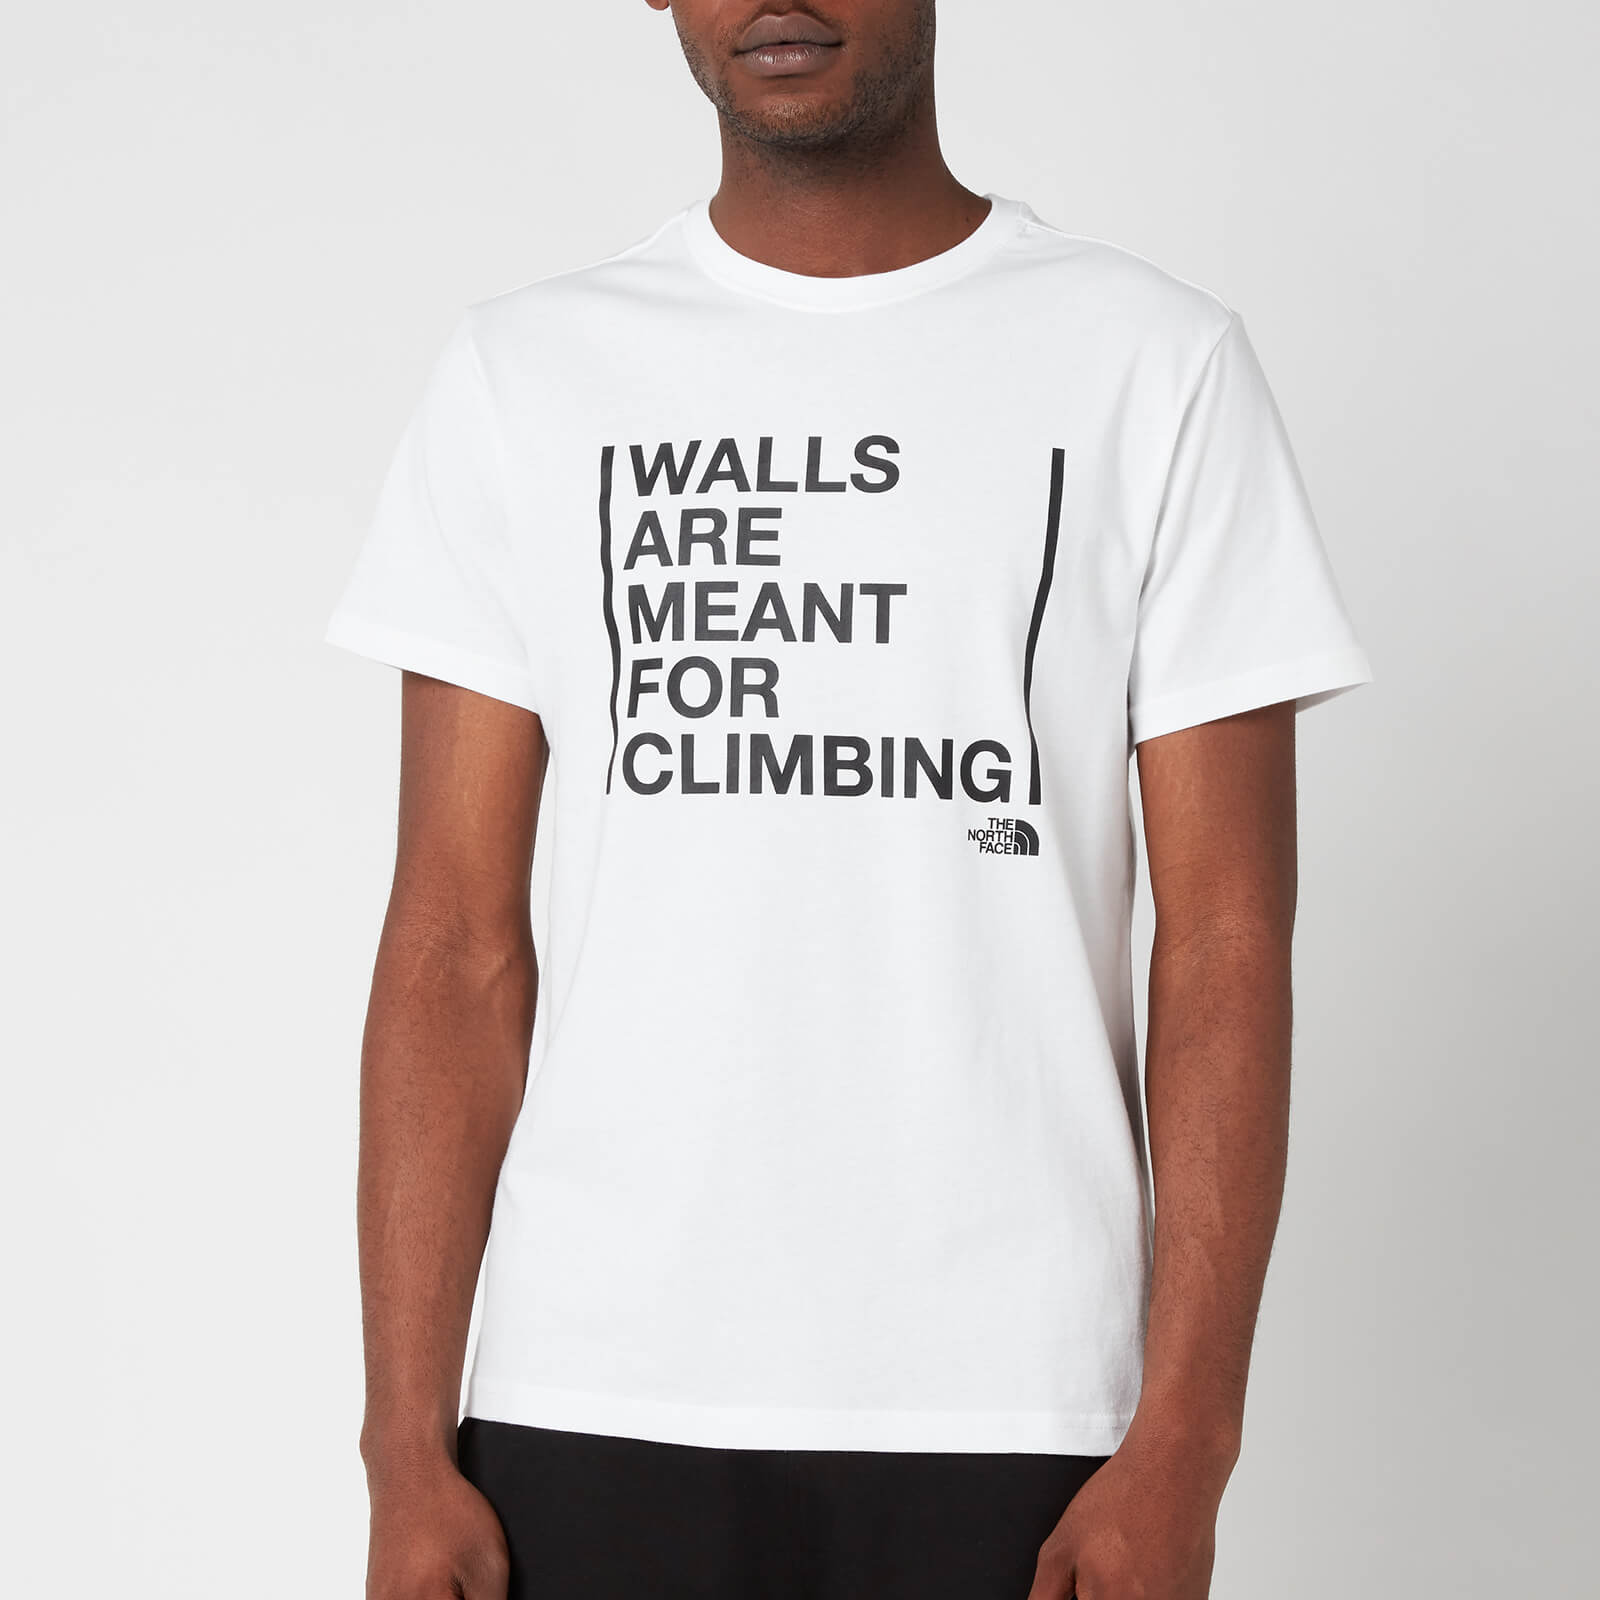 The North Face Men's  Walls Are Meant For Climbing  Short Sleeve T-Shirt - TNF White - M